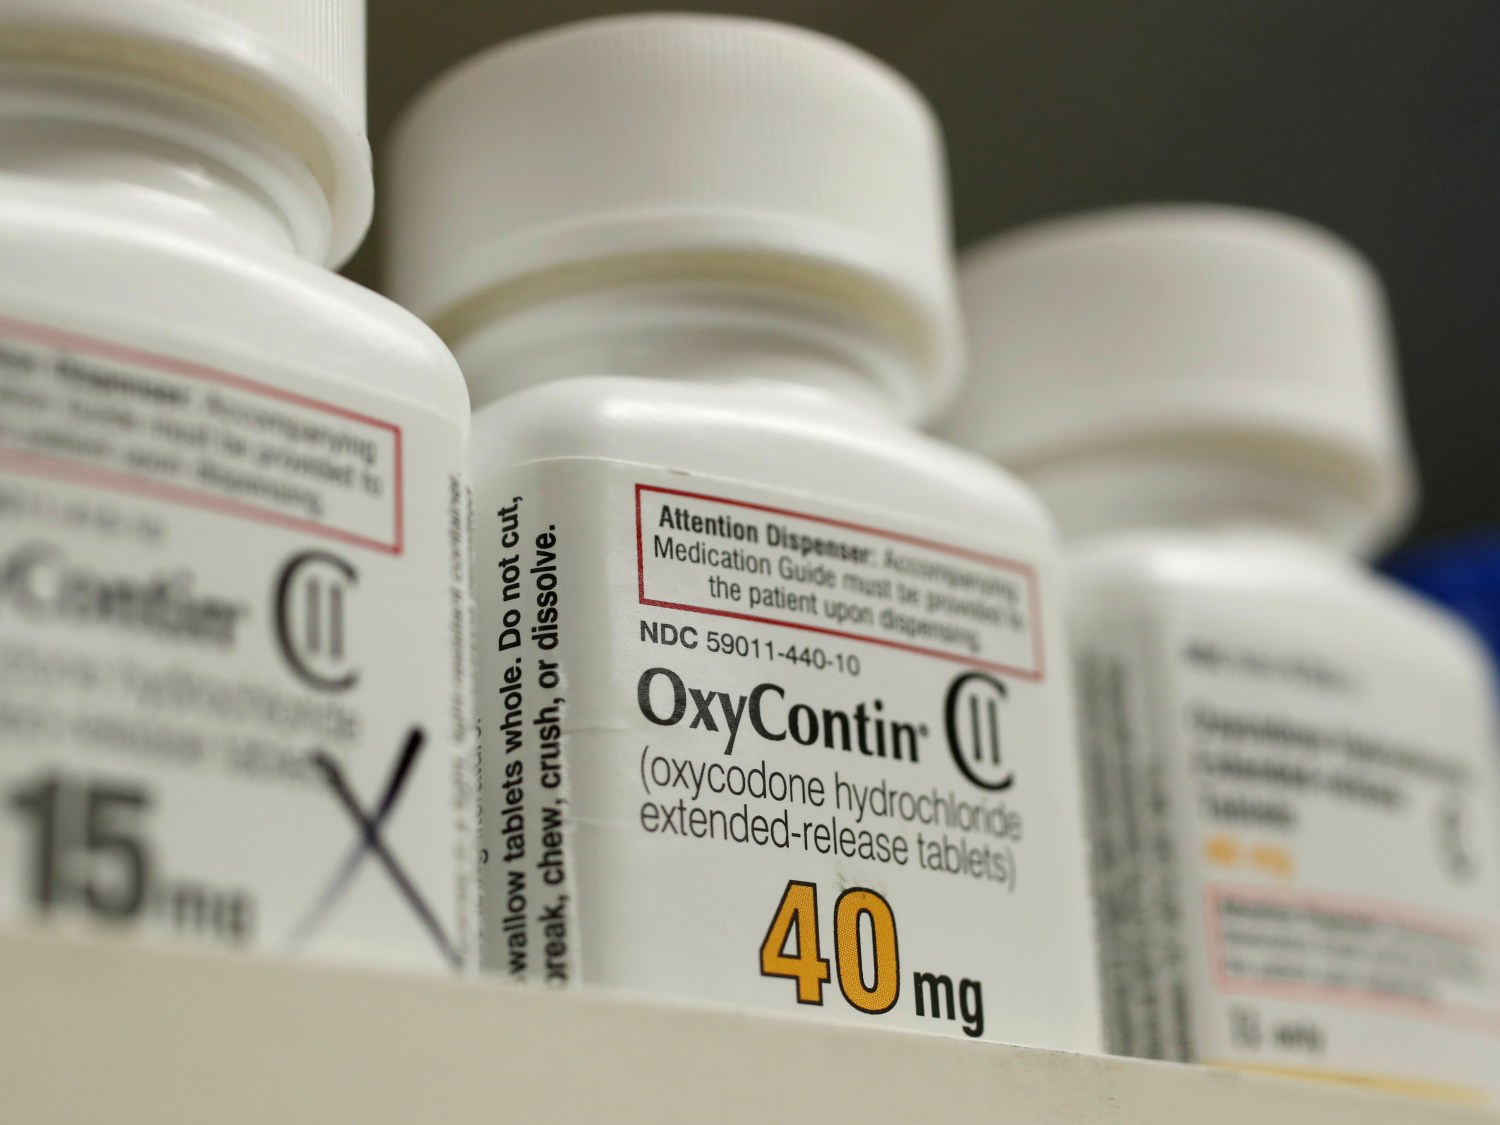 Bottles of prescription painkiller OxyContin made by Purdue Pharma LP sit on a shelf at a local pharmacy in Provo, Utah, U.S., April 25, 2017.   REUTERS/George Frey - RC137E5423F0